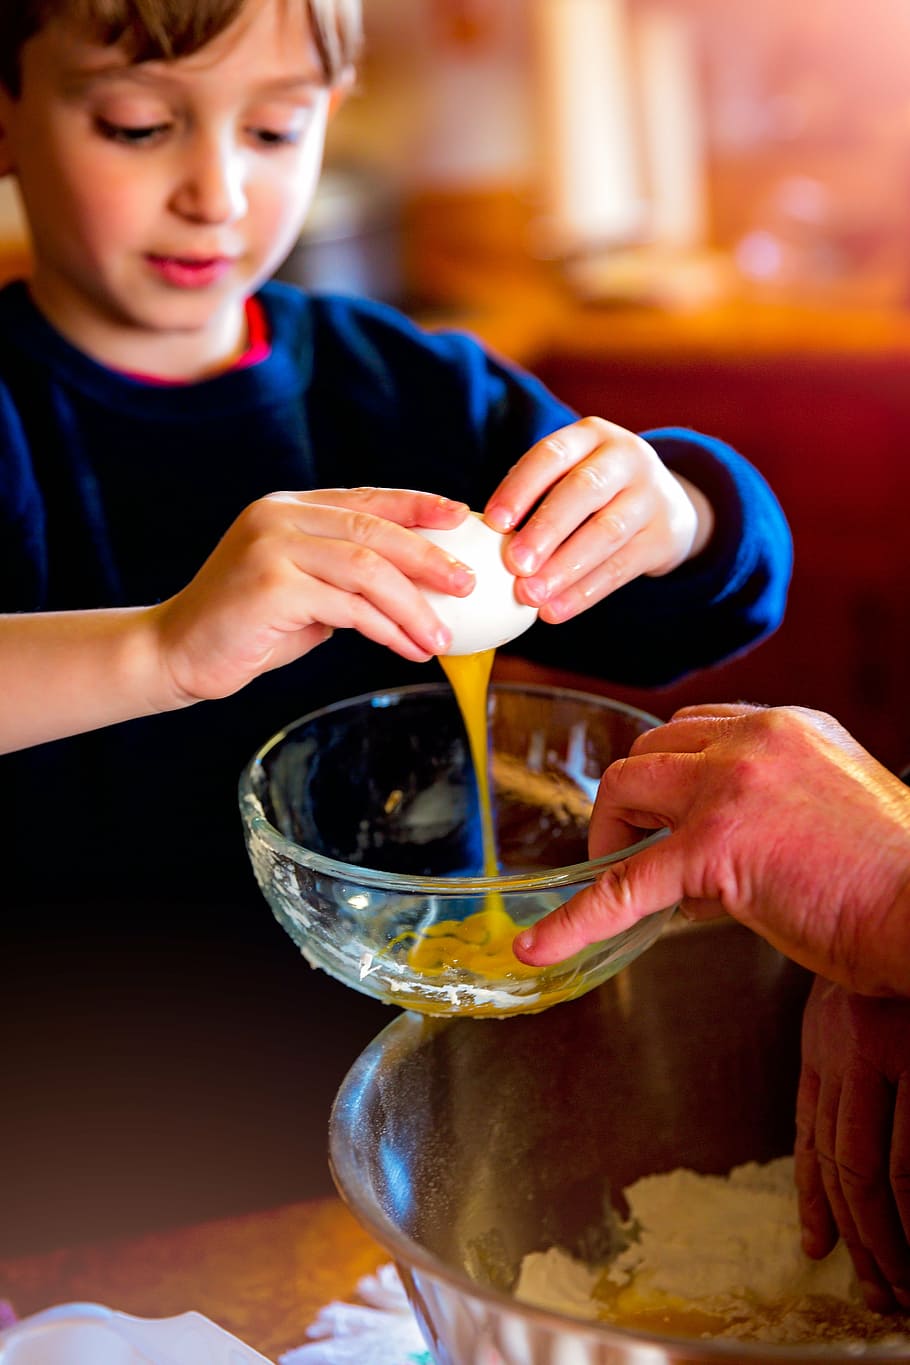 boy breaking an egg over a bowl, baking, children, cooking, education